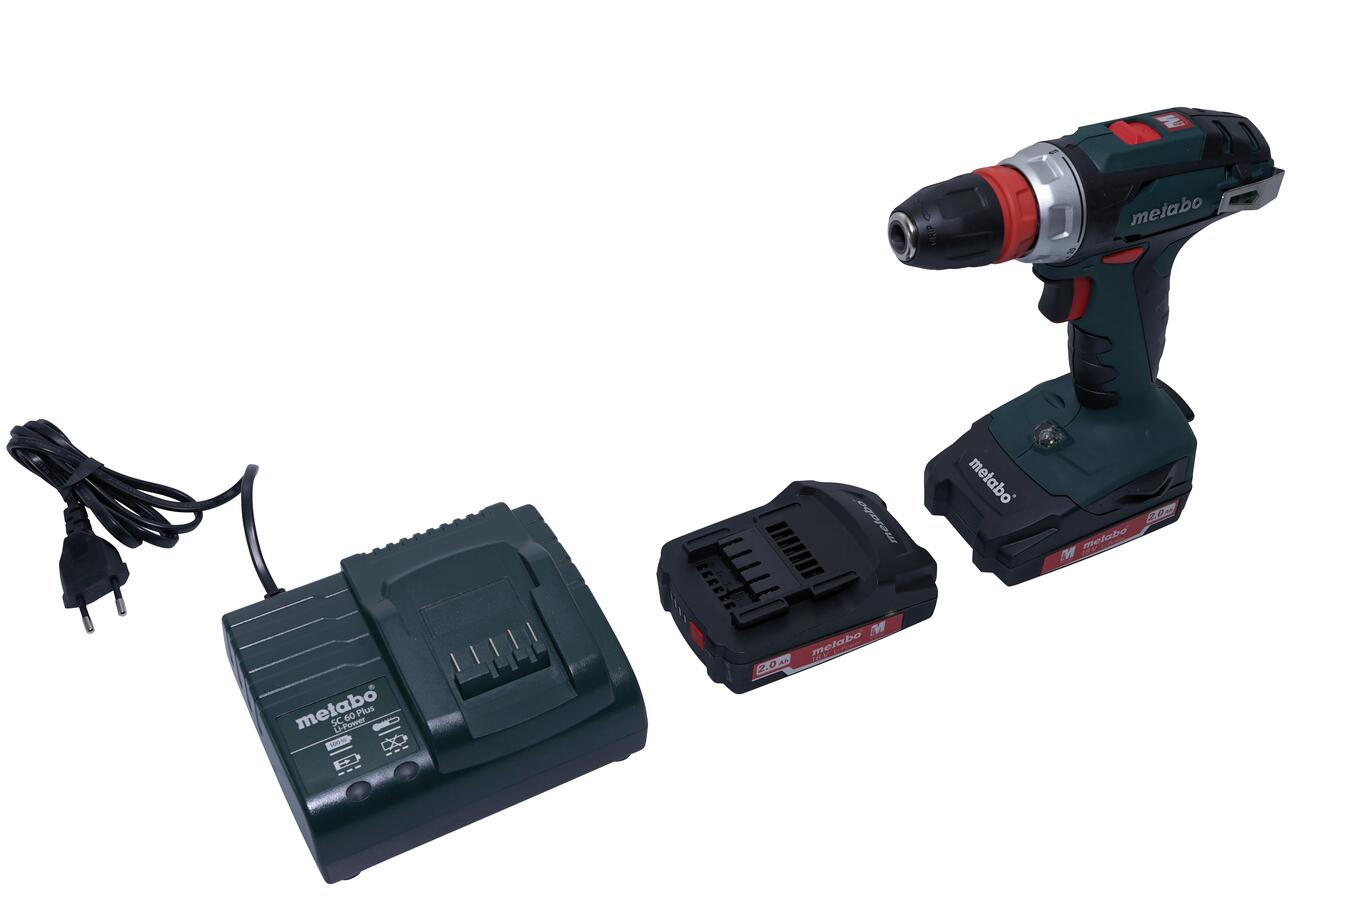 BS 18 Quick Metabo